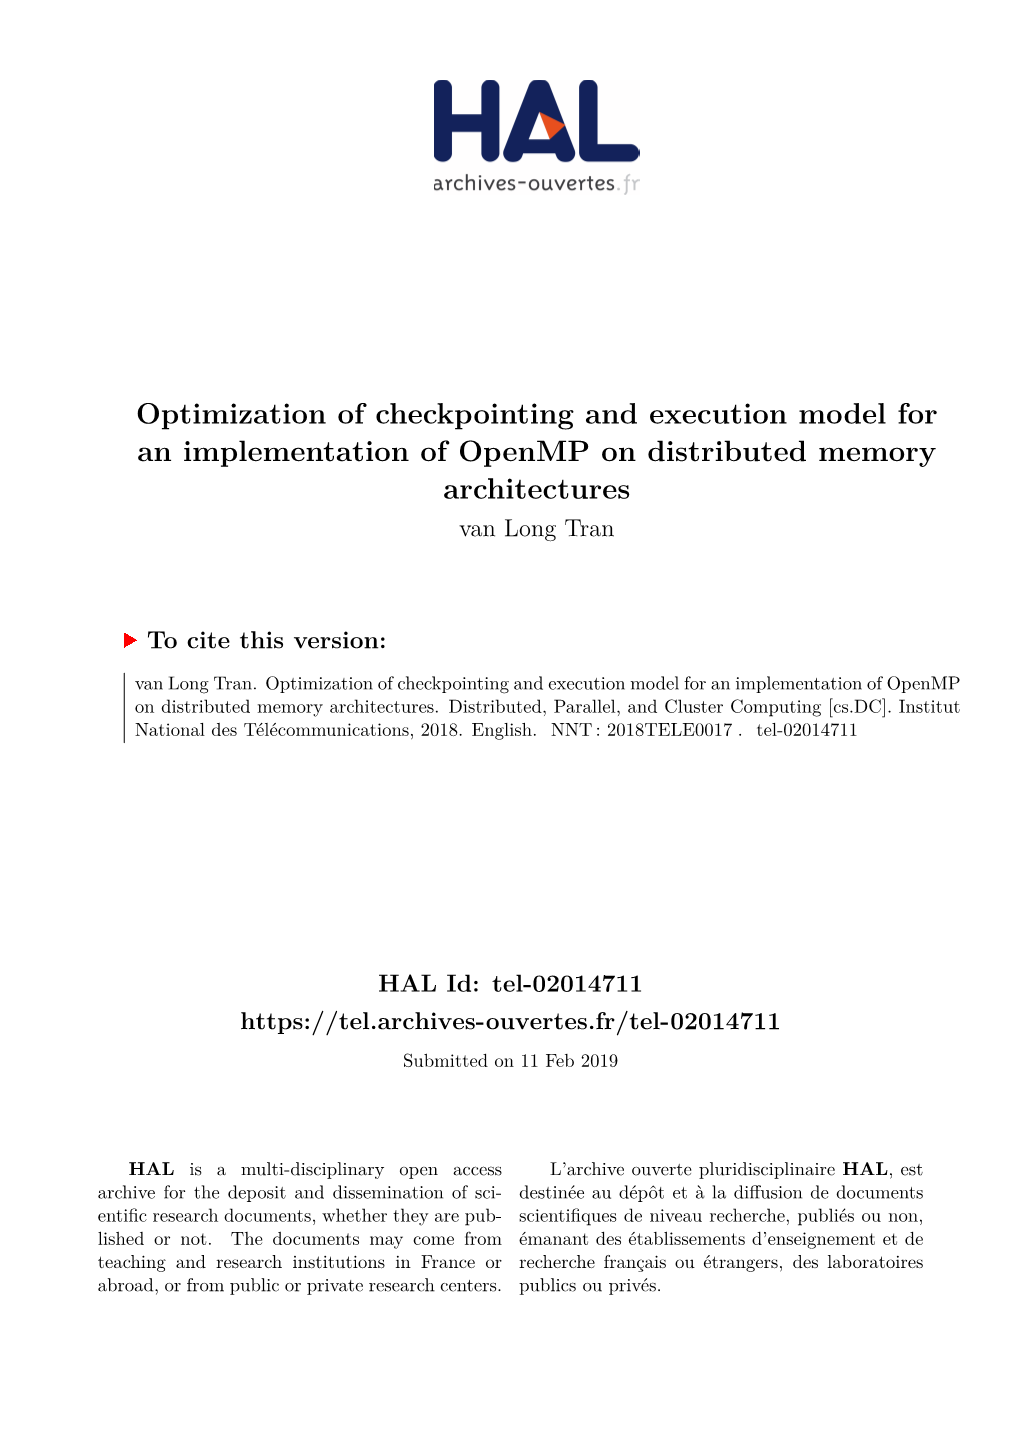 Optimization of Checkpointing and Execution Model for an Implementation of Openmp on Distributed Memory Architectures Van Long Tran